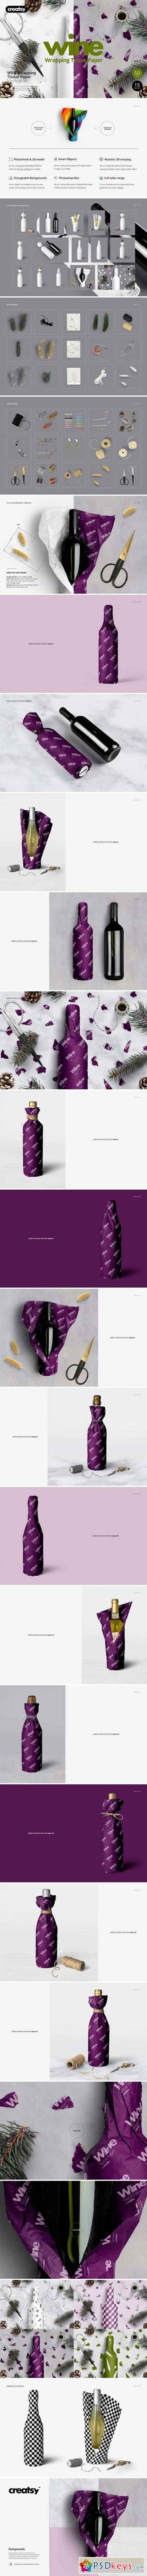 Wrapping Paper Wine Bottle Mockup 2143223